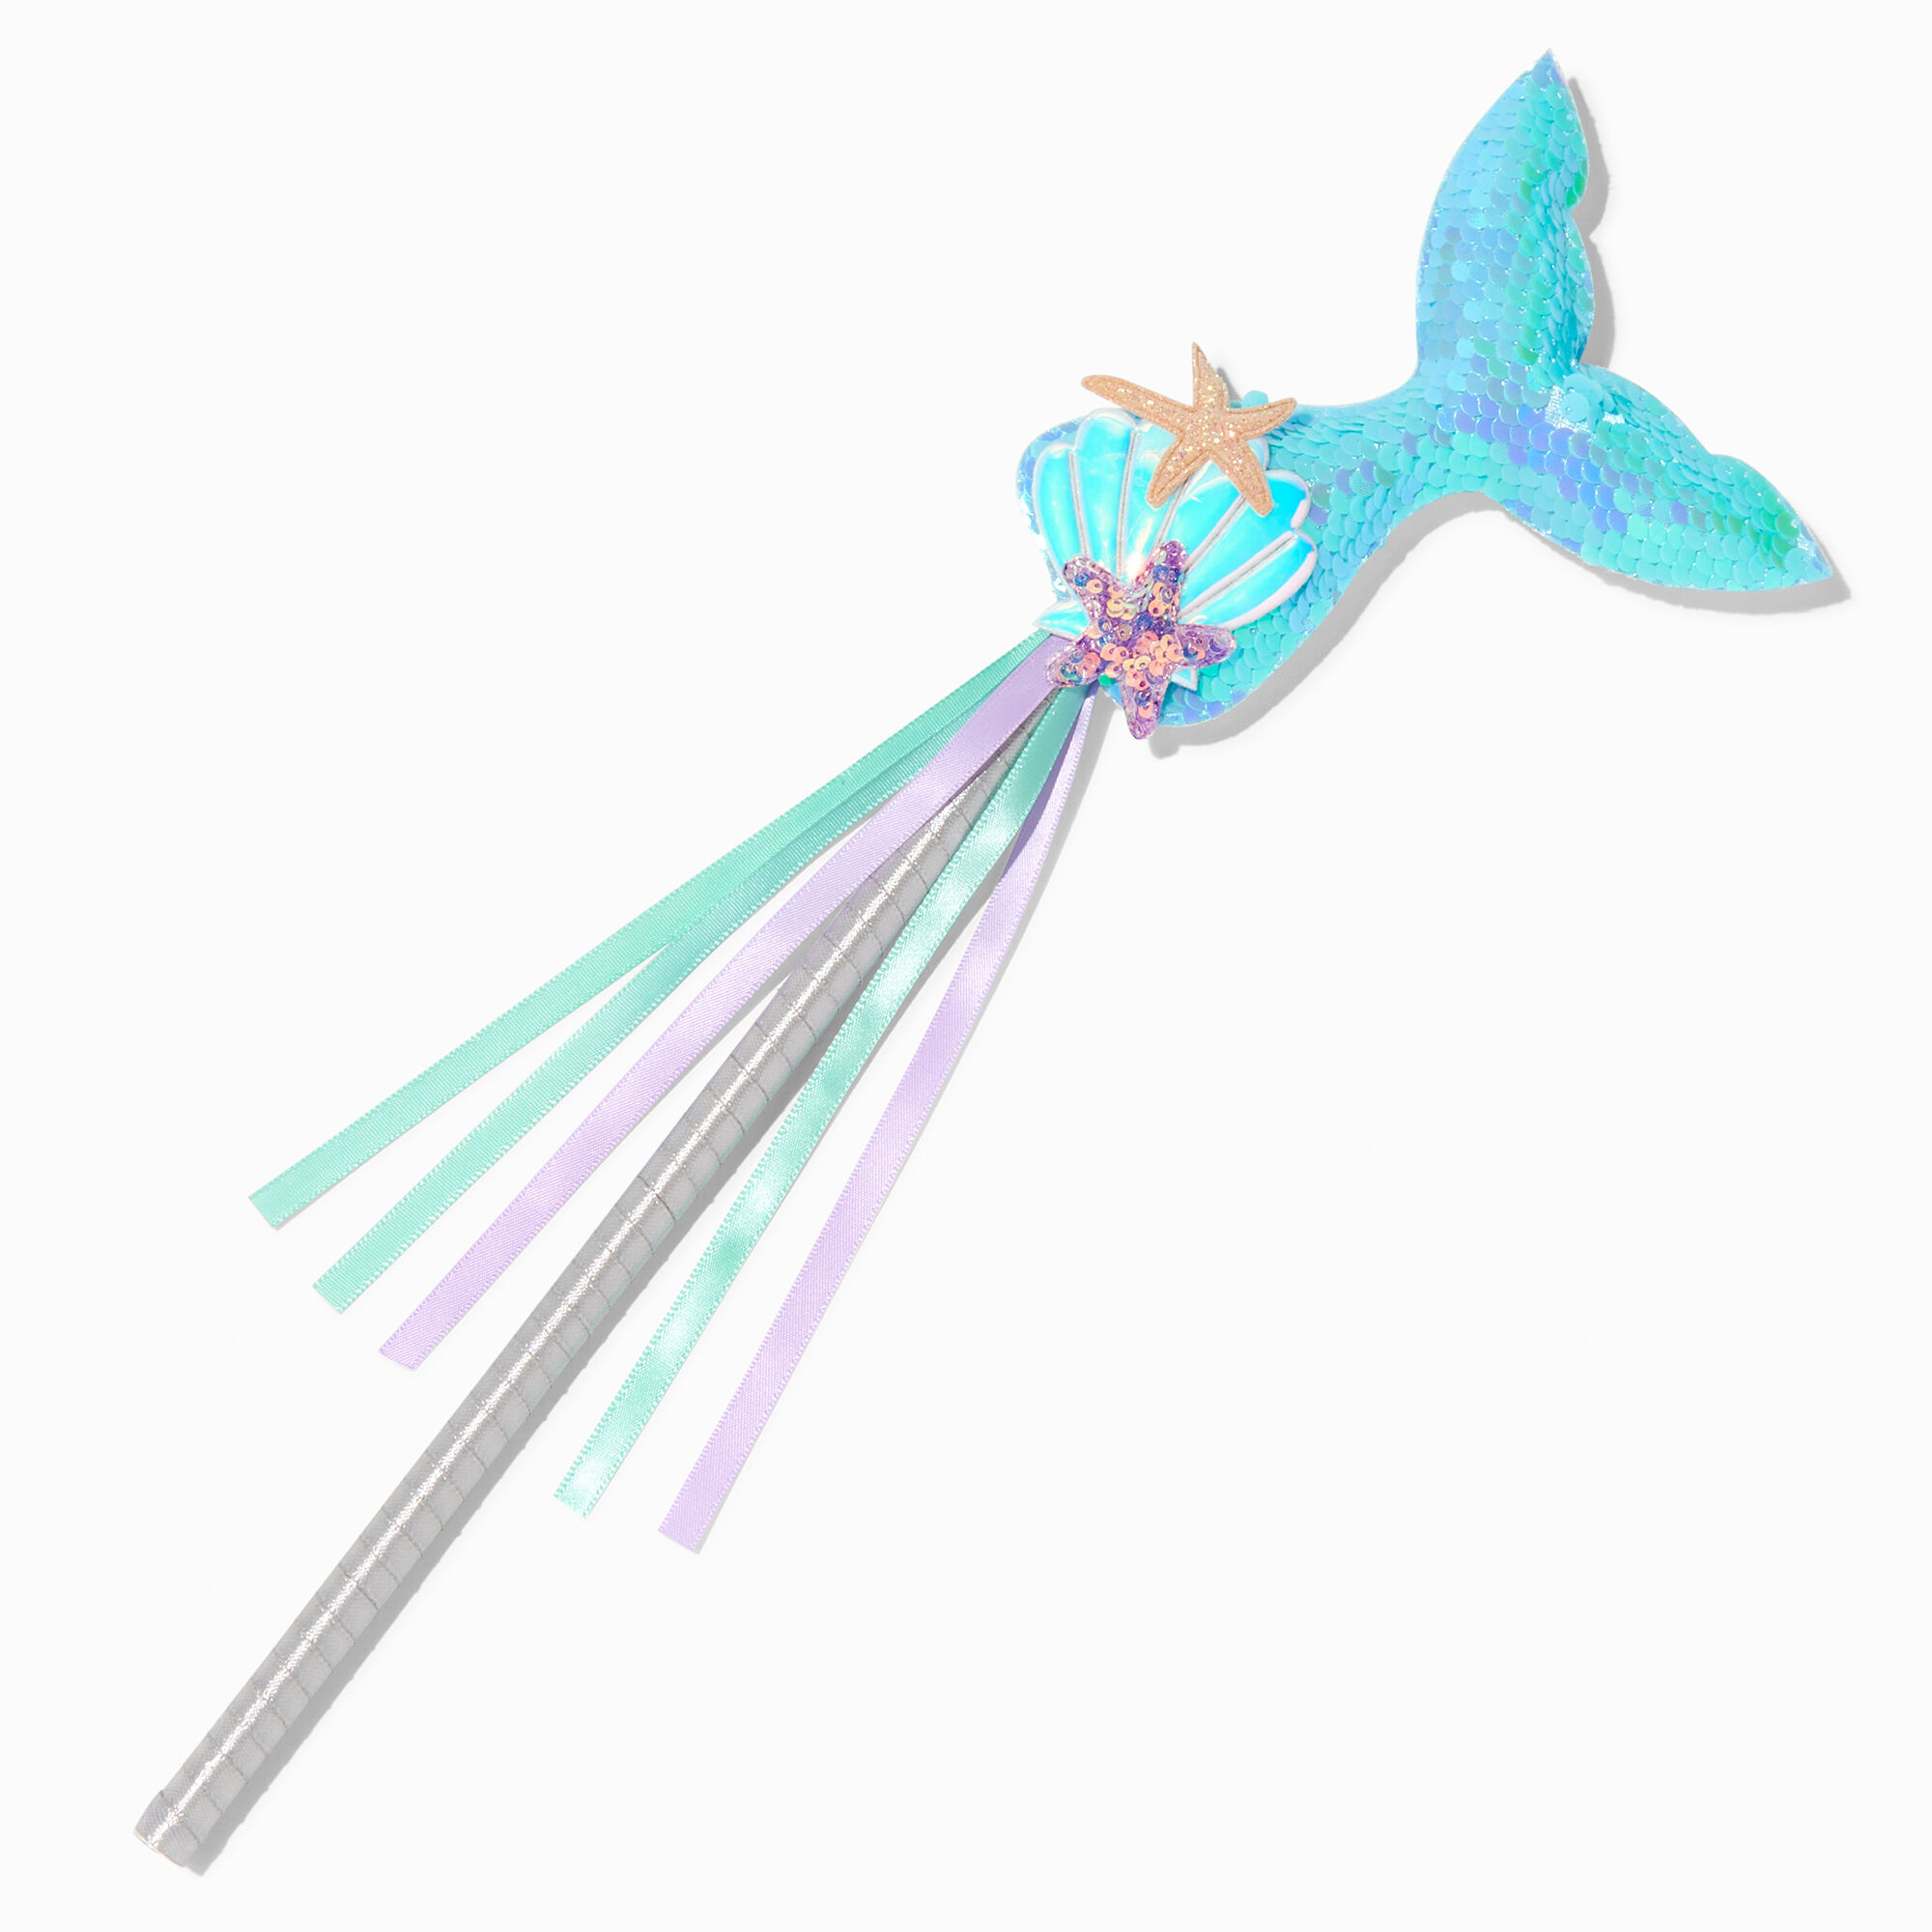 View Claires Club Mermaid Wand information